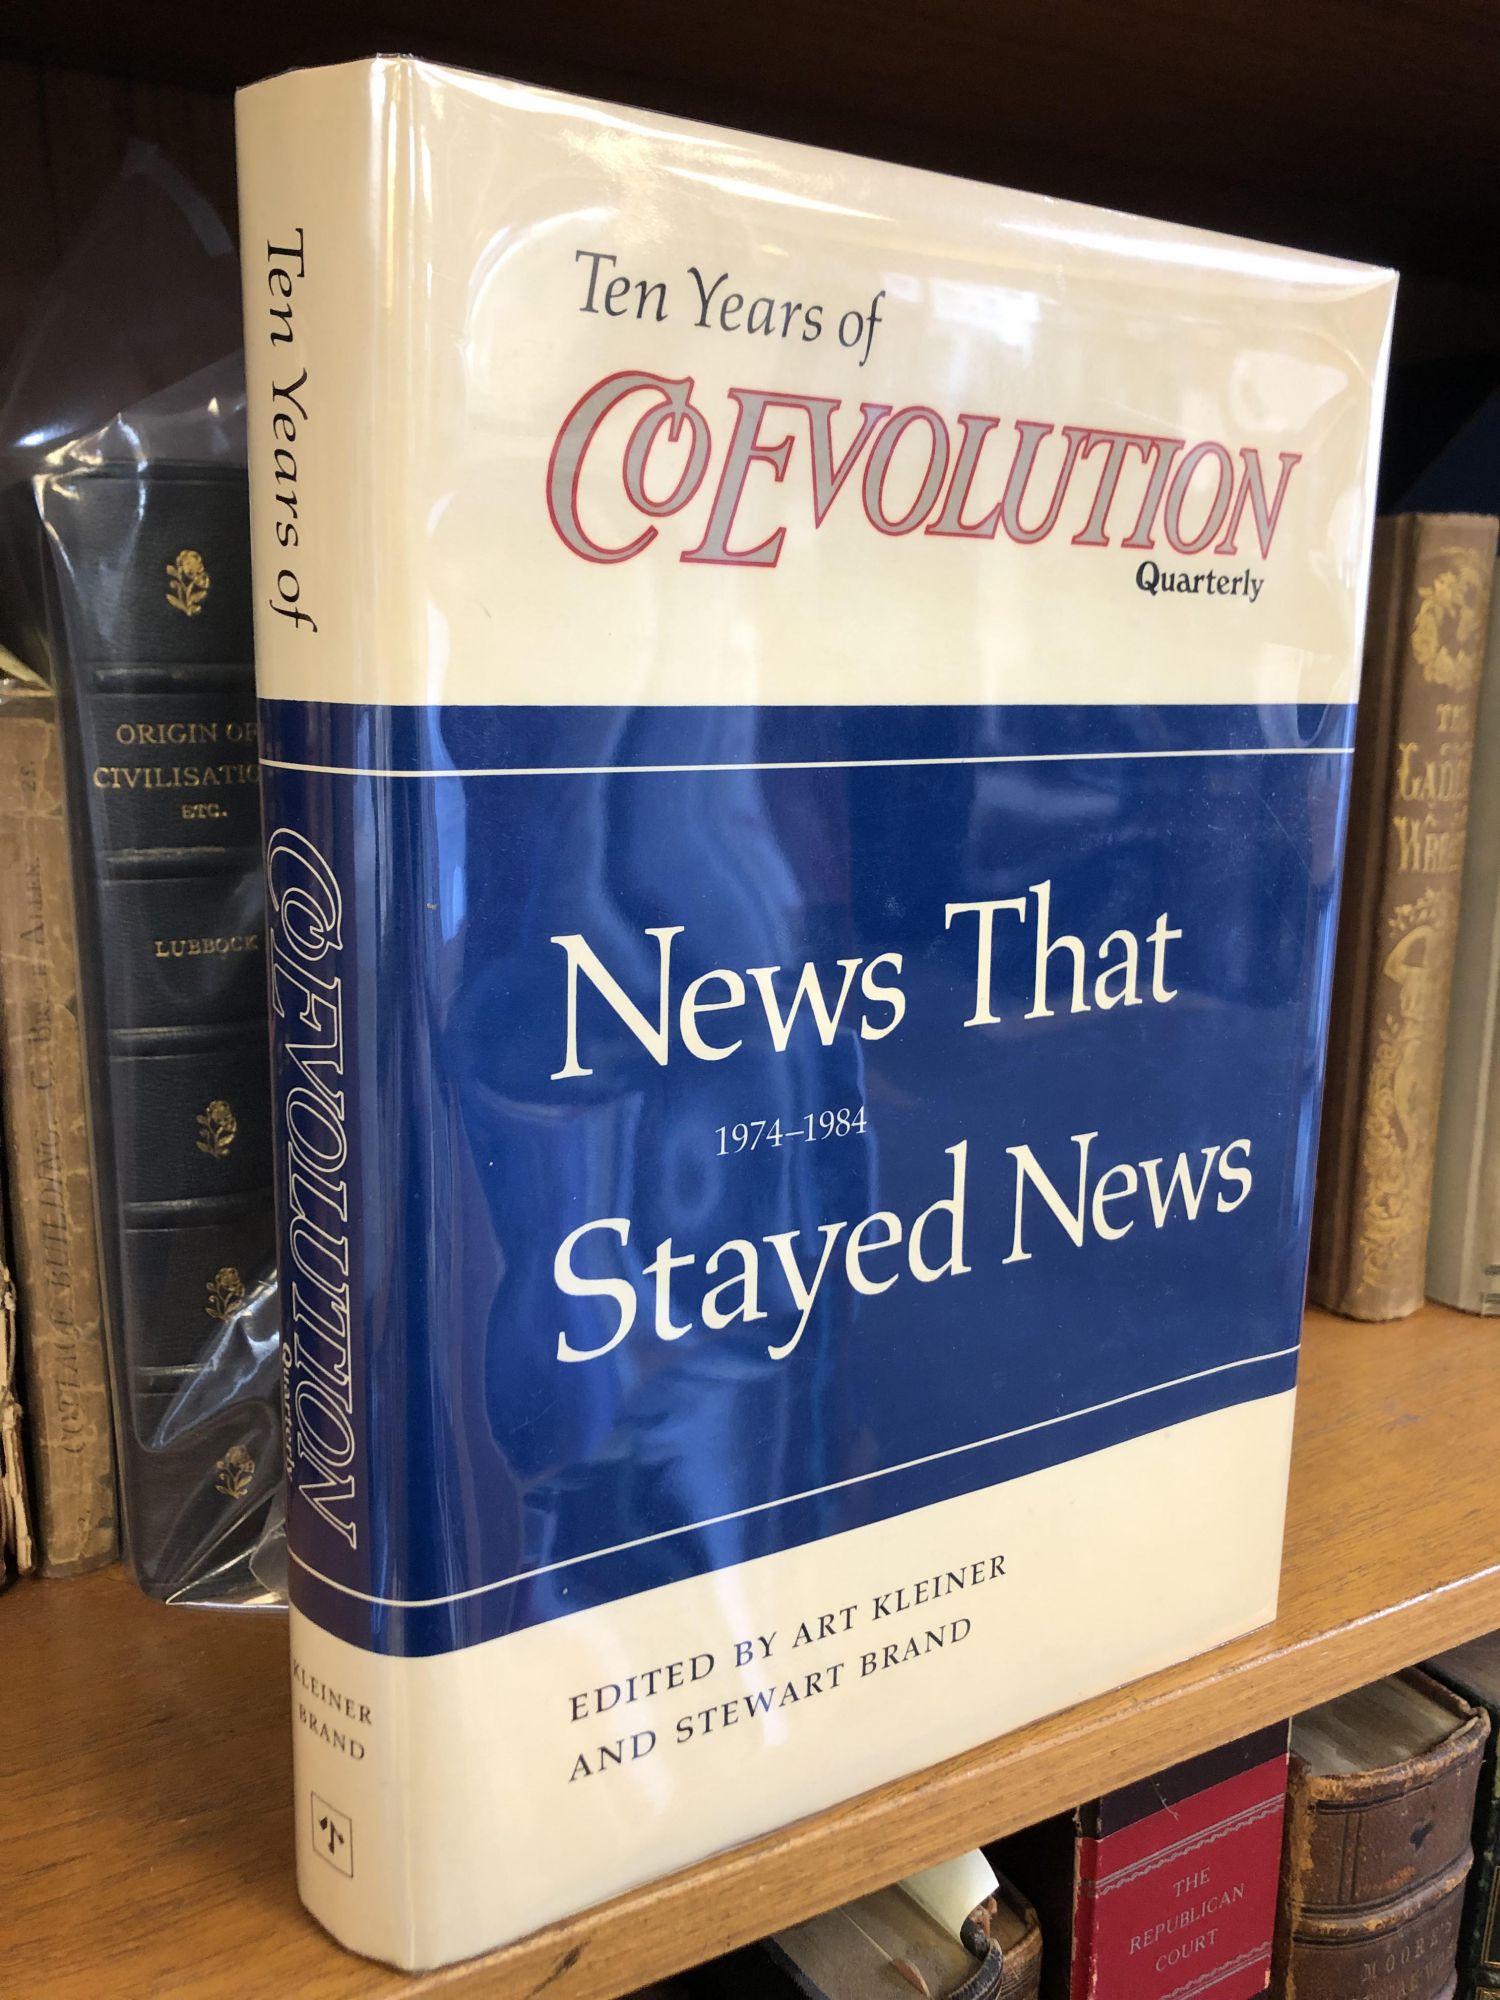 Product Image for TEN YEARS OF COEVOLUTION QUARTERLY: NEWS THAT STAYED NEWS 1974-1984 [Signed]